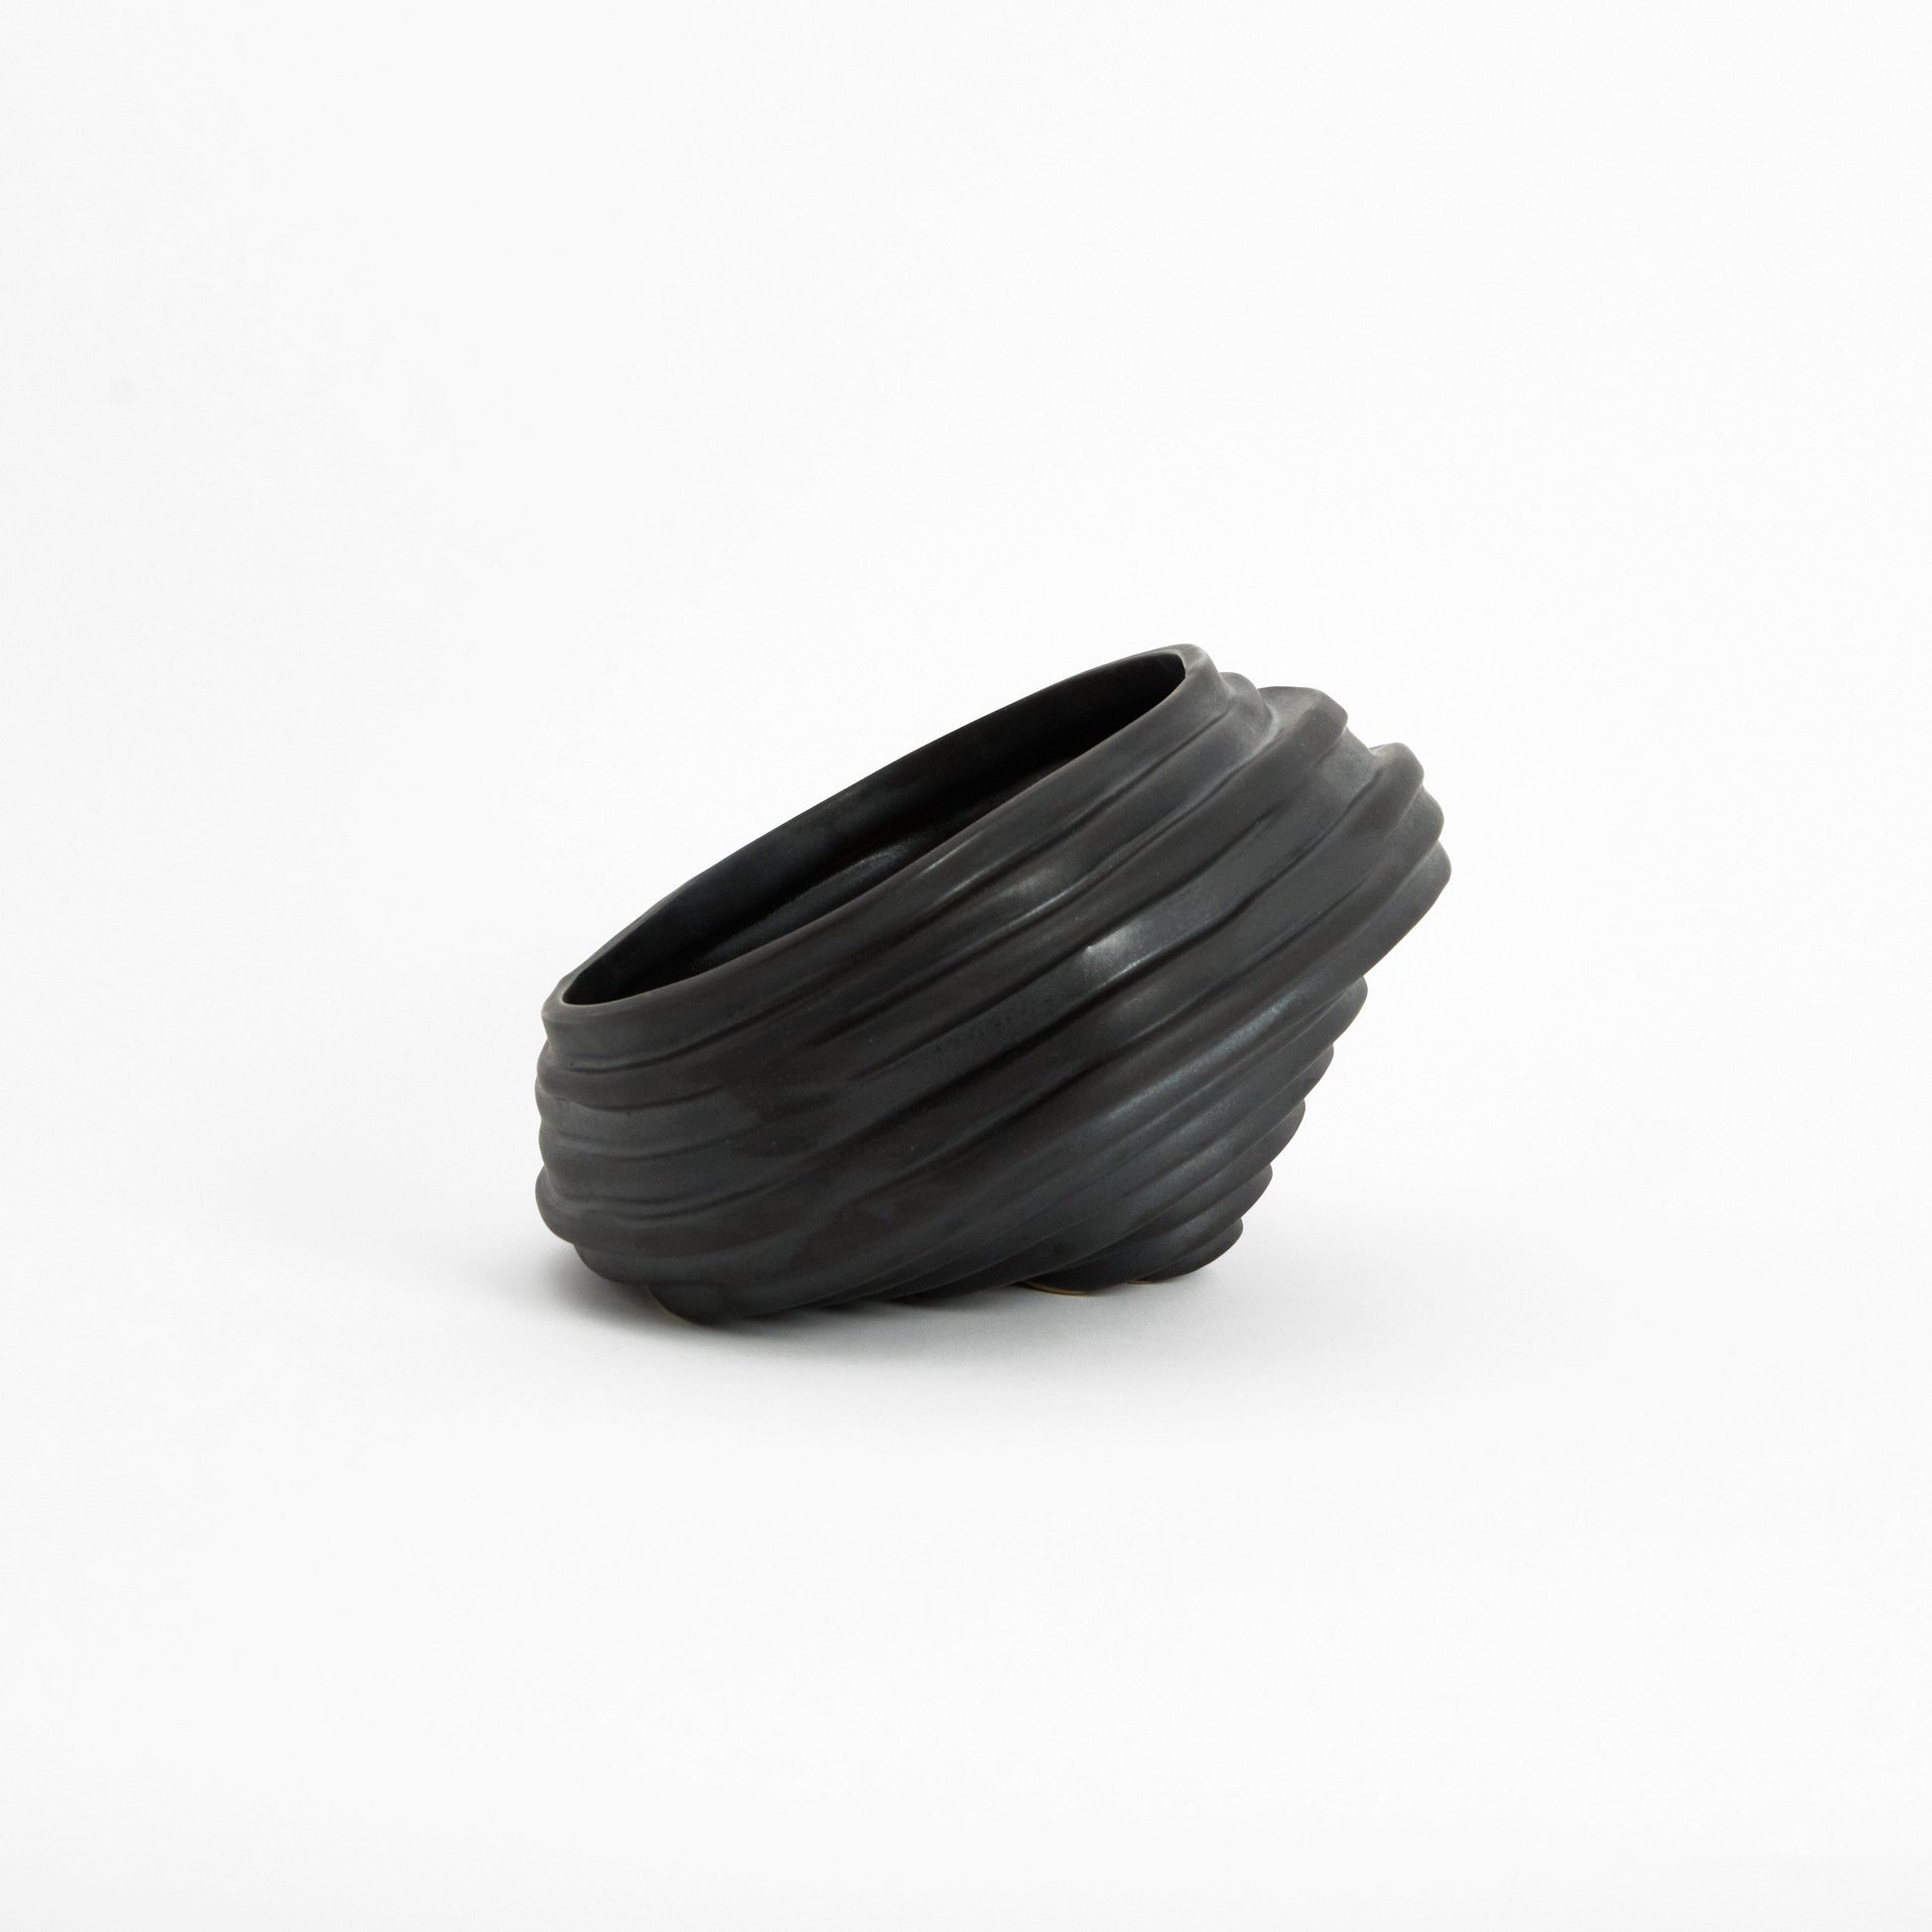 Alfonso Fruit Bowl in Graphite Bowls